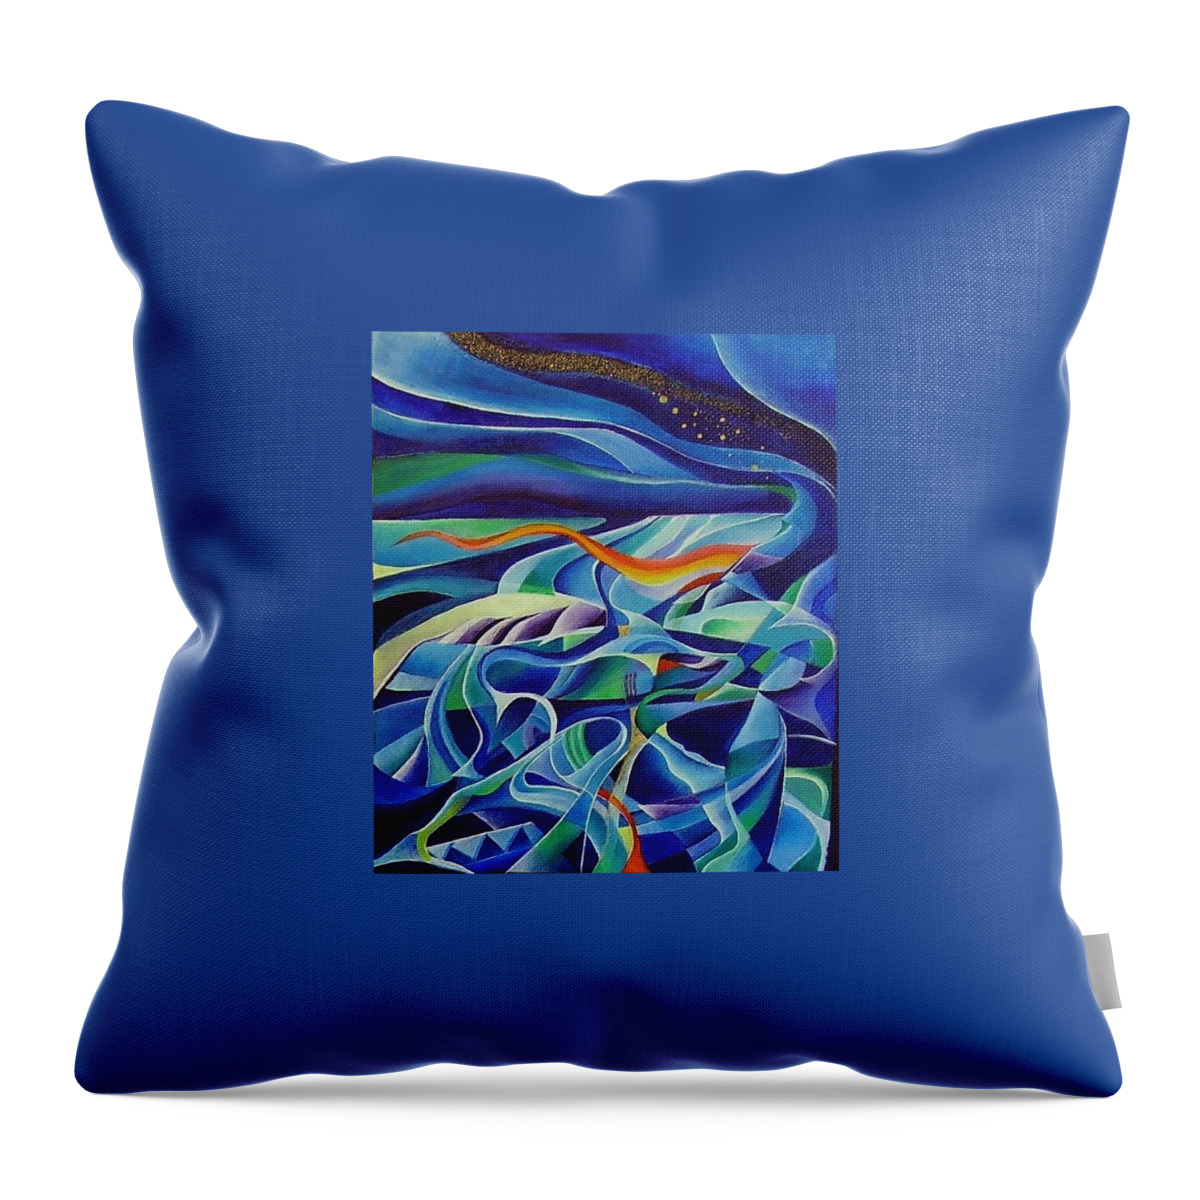 Winter Vivaldi Music Abstract Acrylic Throw Pillow featuring the painting Winter by Wolfgang Schweizer